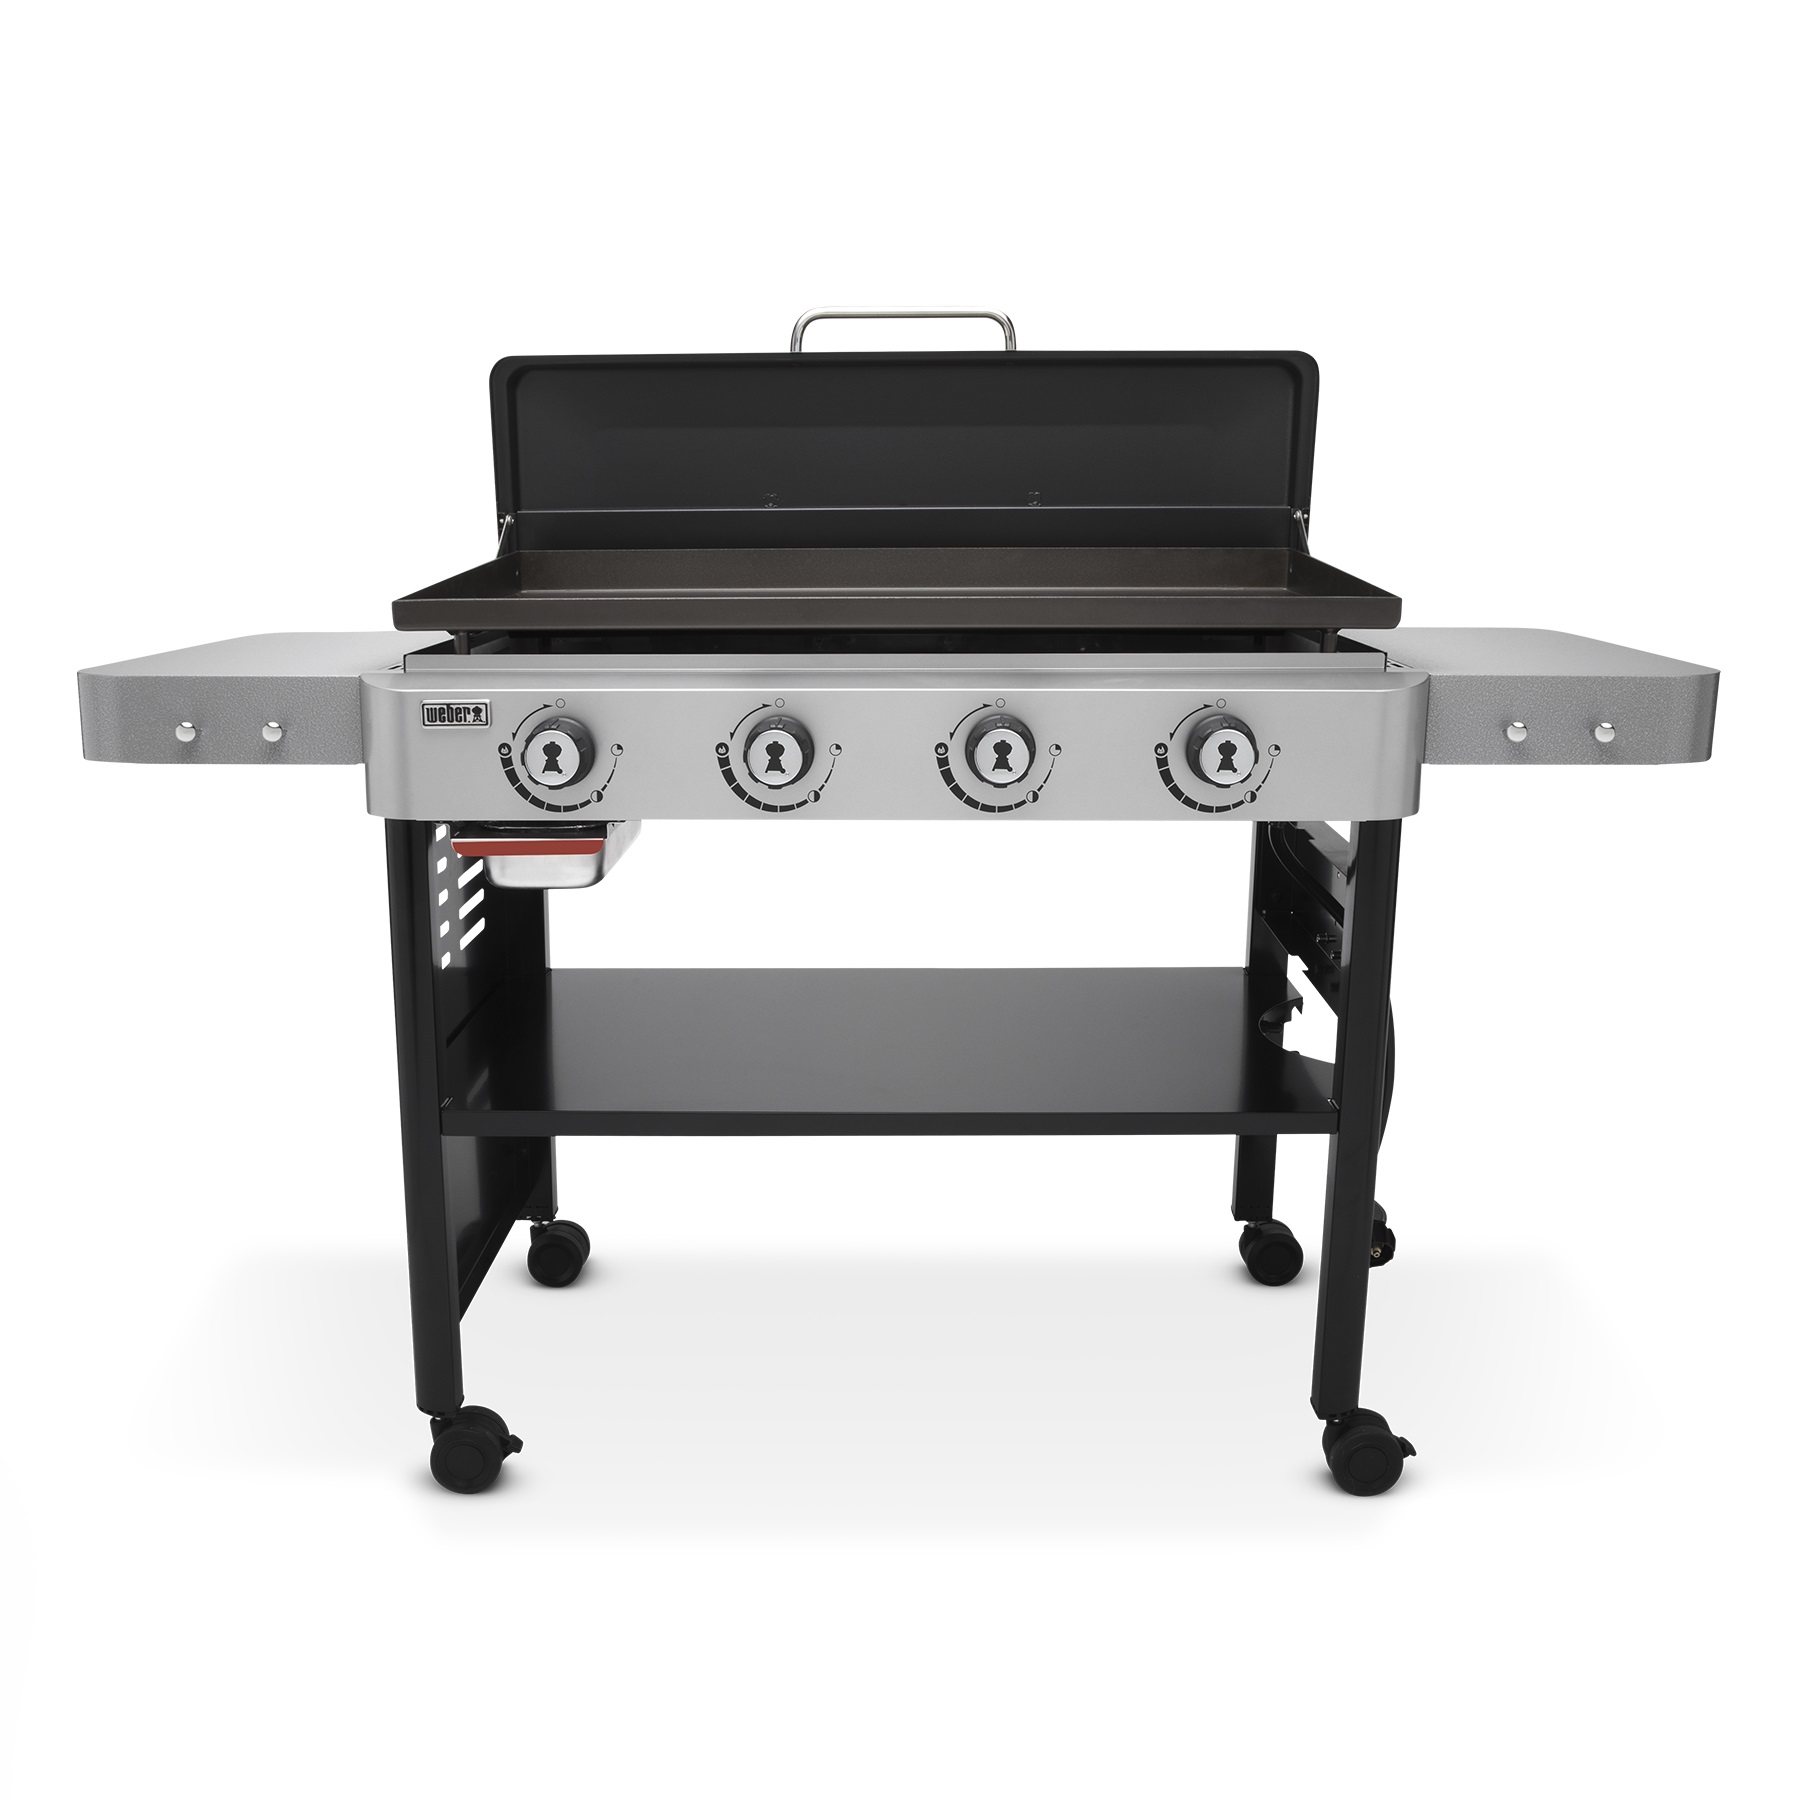 The New Weber Griddle is Released in 28" and 36" Sizes CookOut News